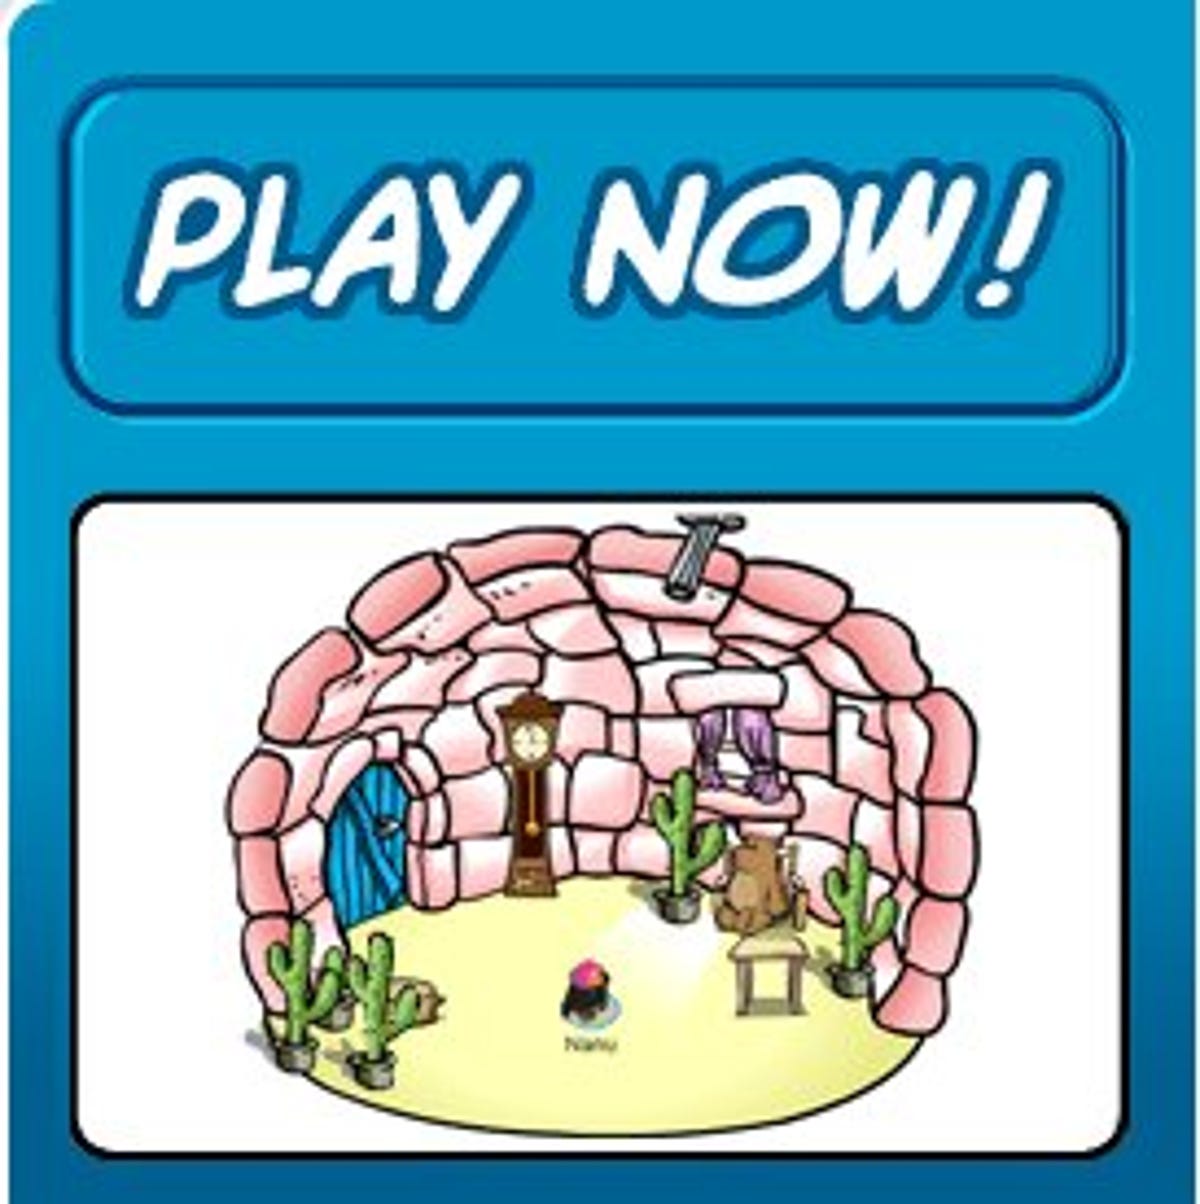 Club Penguin predicts Igloos will be decorated with Cactii